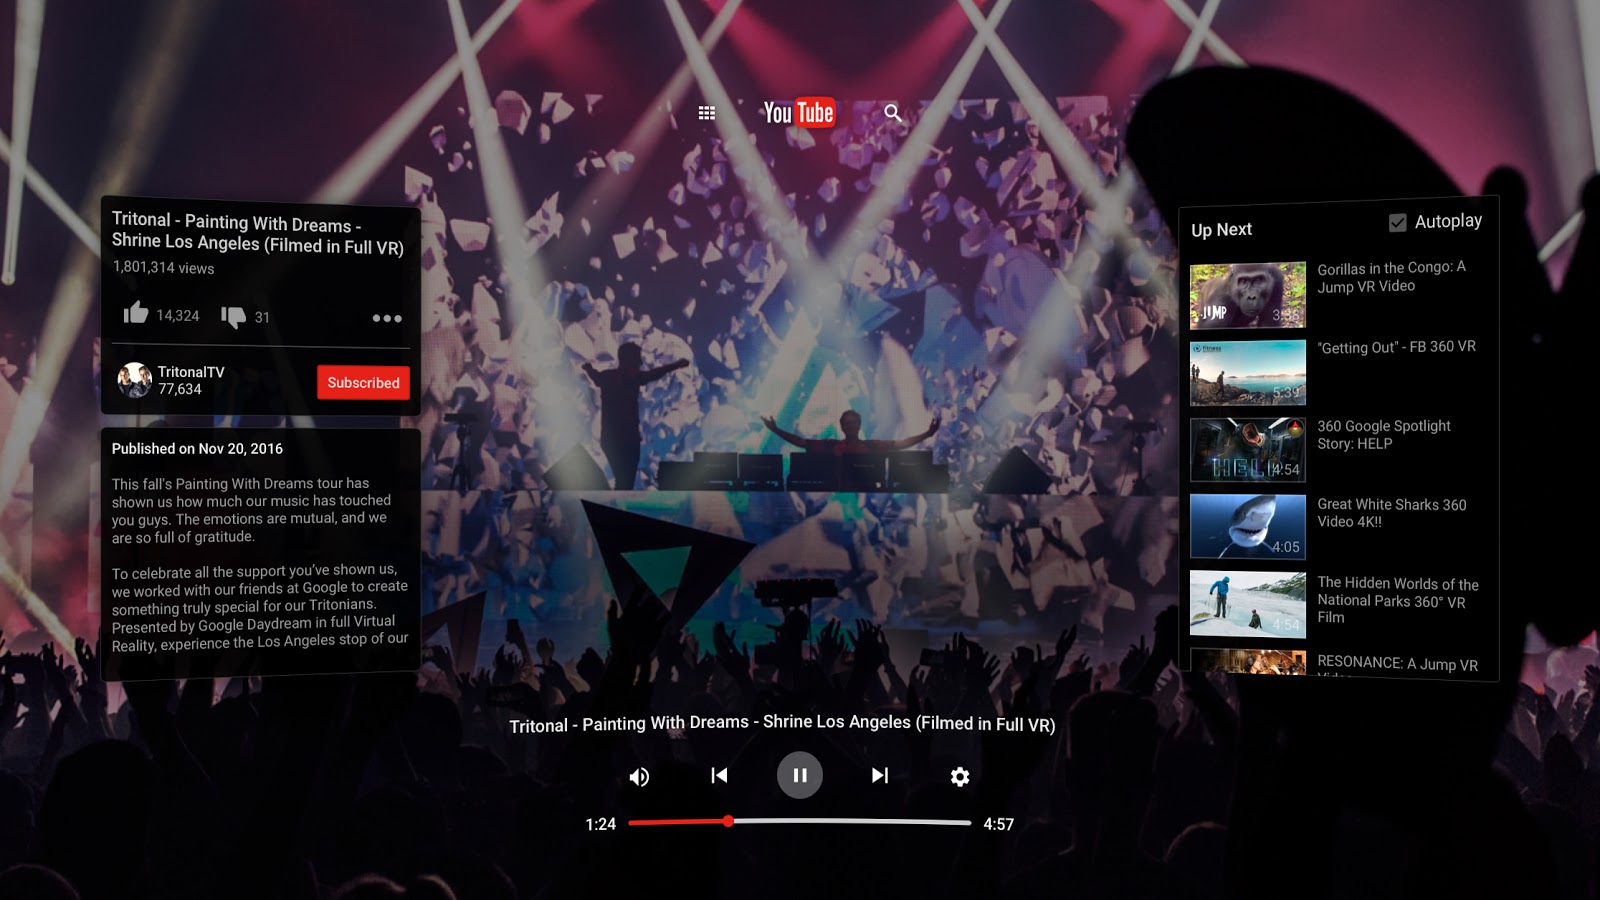 YouTube just launched a crazy immersive virtual reality app